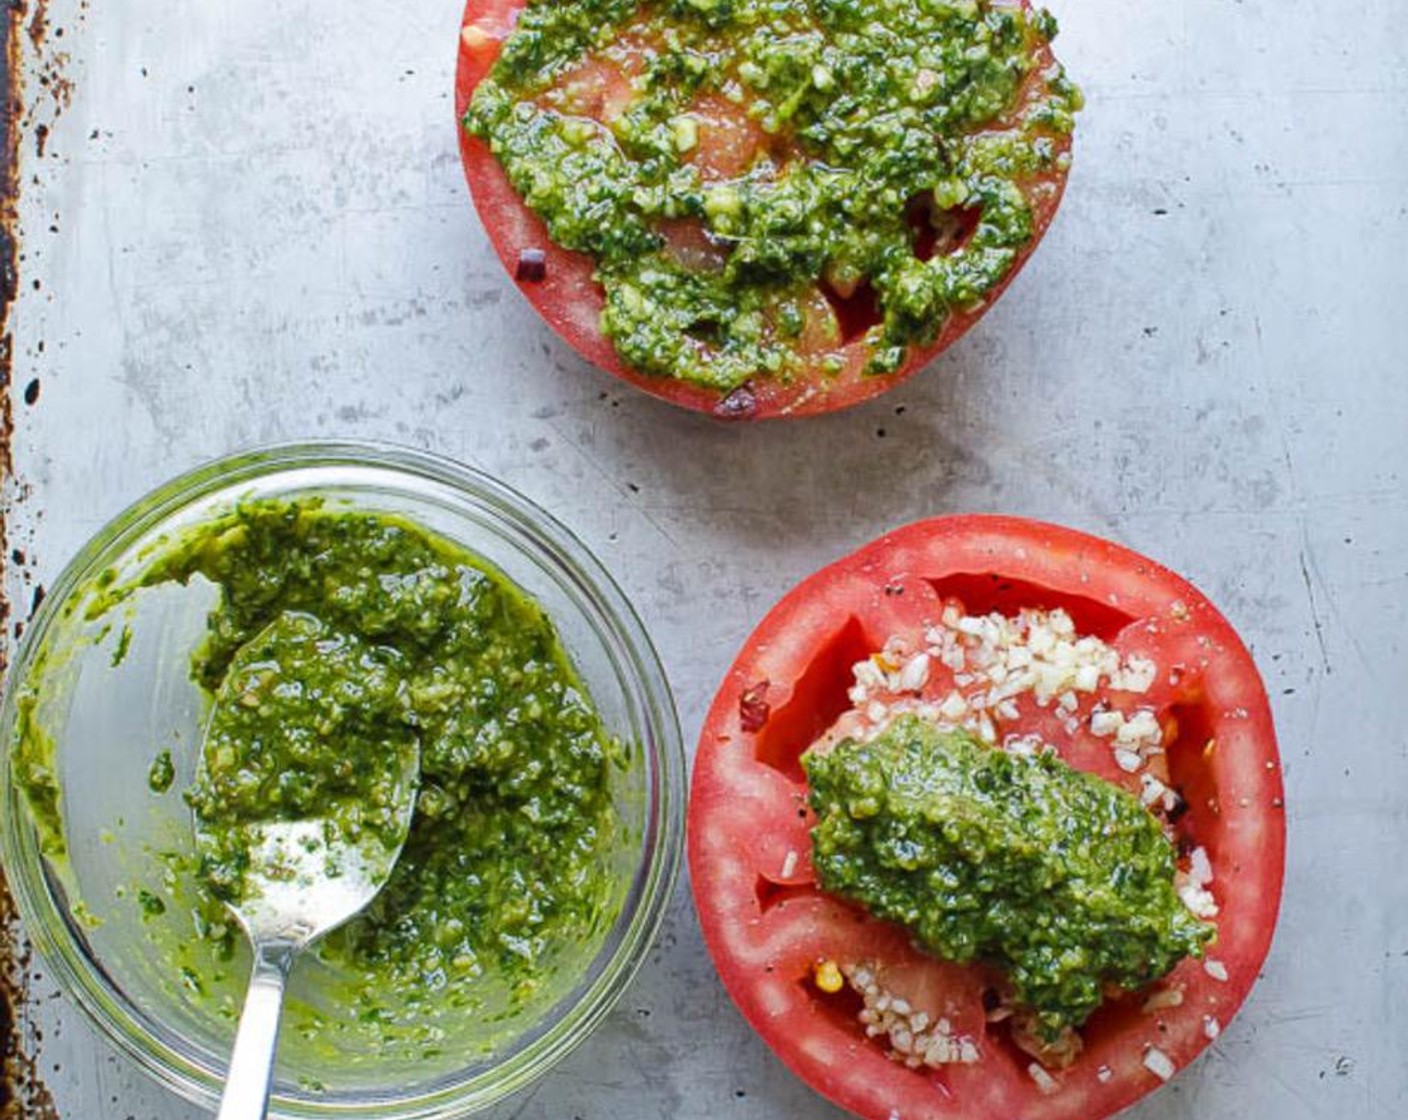 step 4 Add 1 tablespoon of Basil Pesto (1/4 cup) to each tomato half and spread evenly over the tomato. Divide the Breadcrumbs (1/2 cup) between the tomatoes.